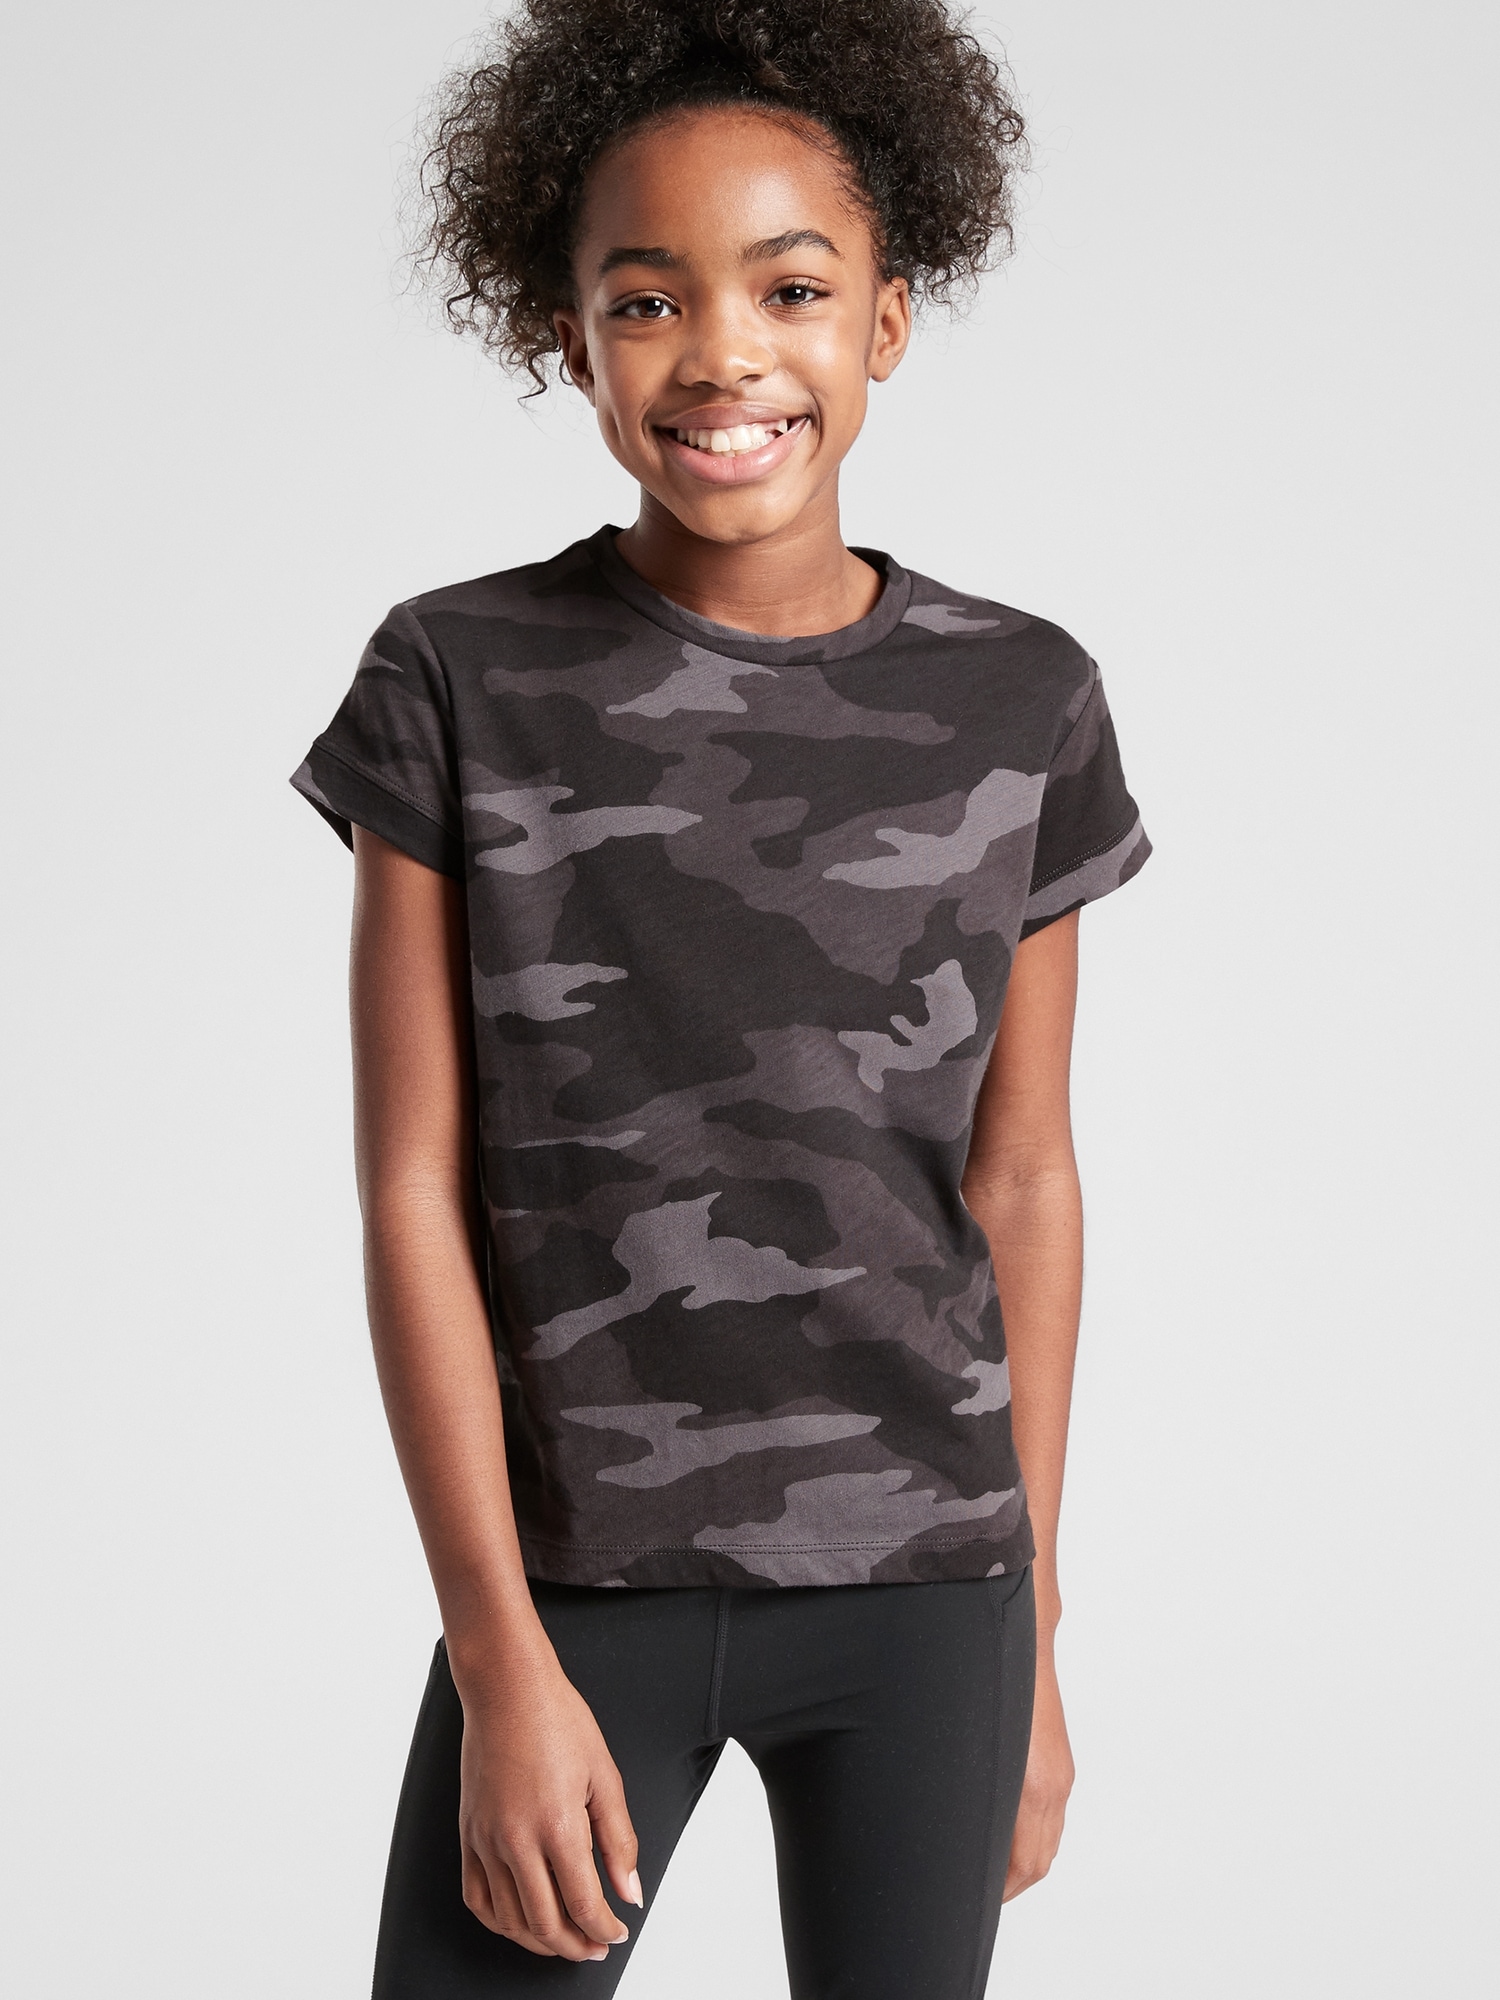 camouflage t shirt for girls